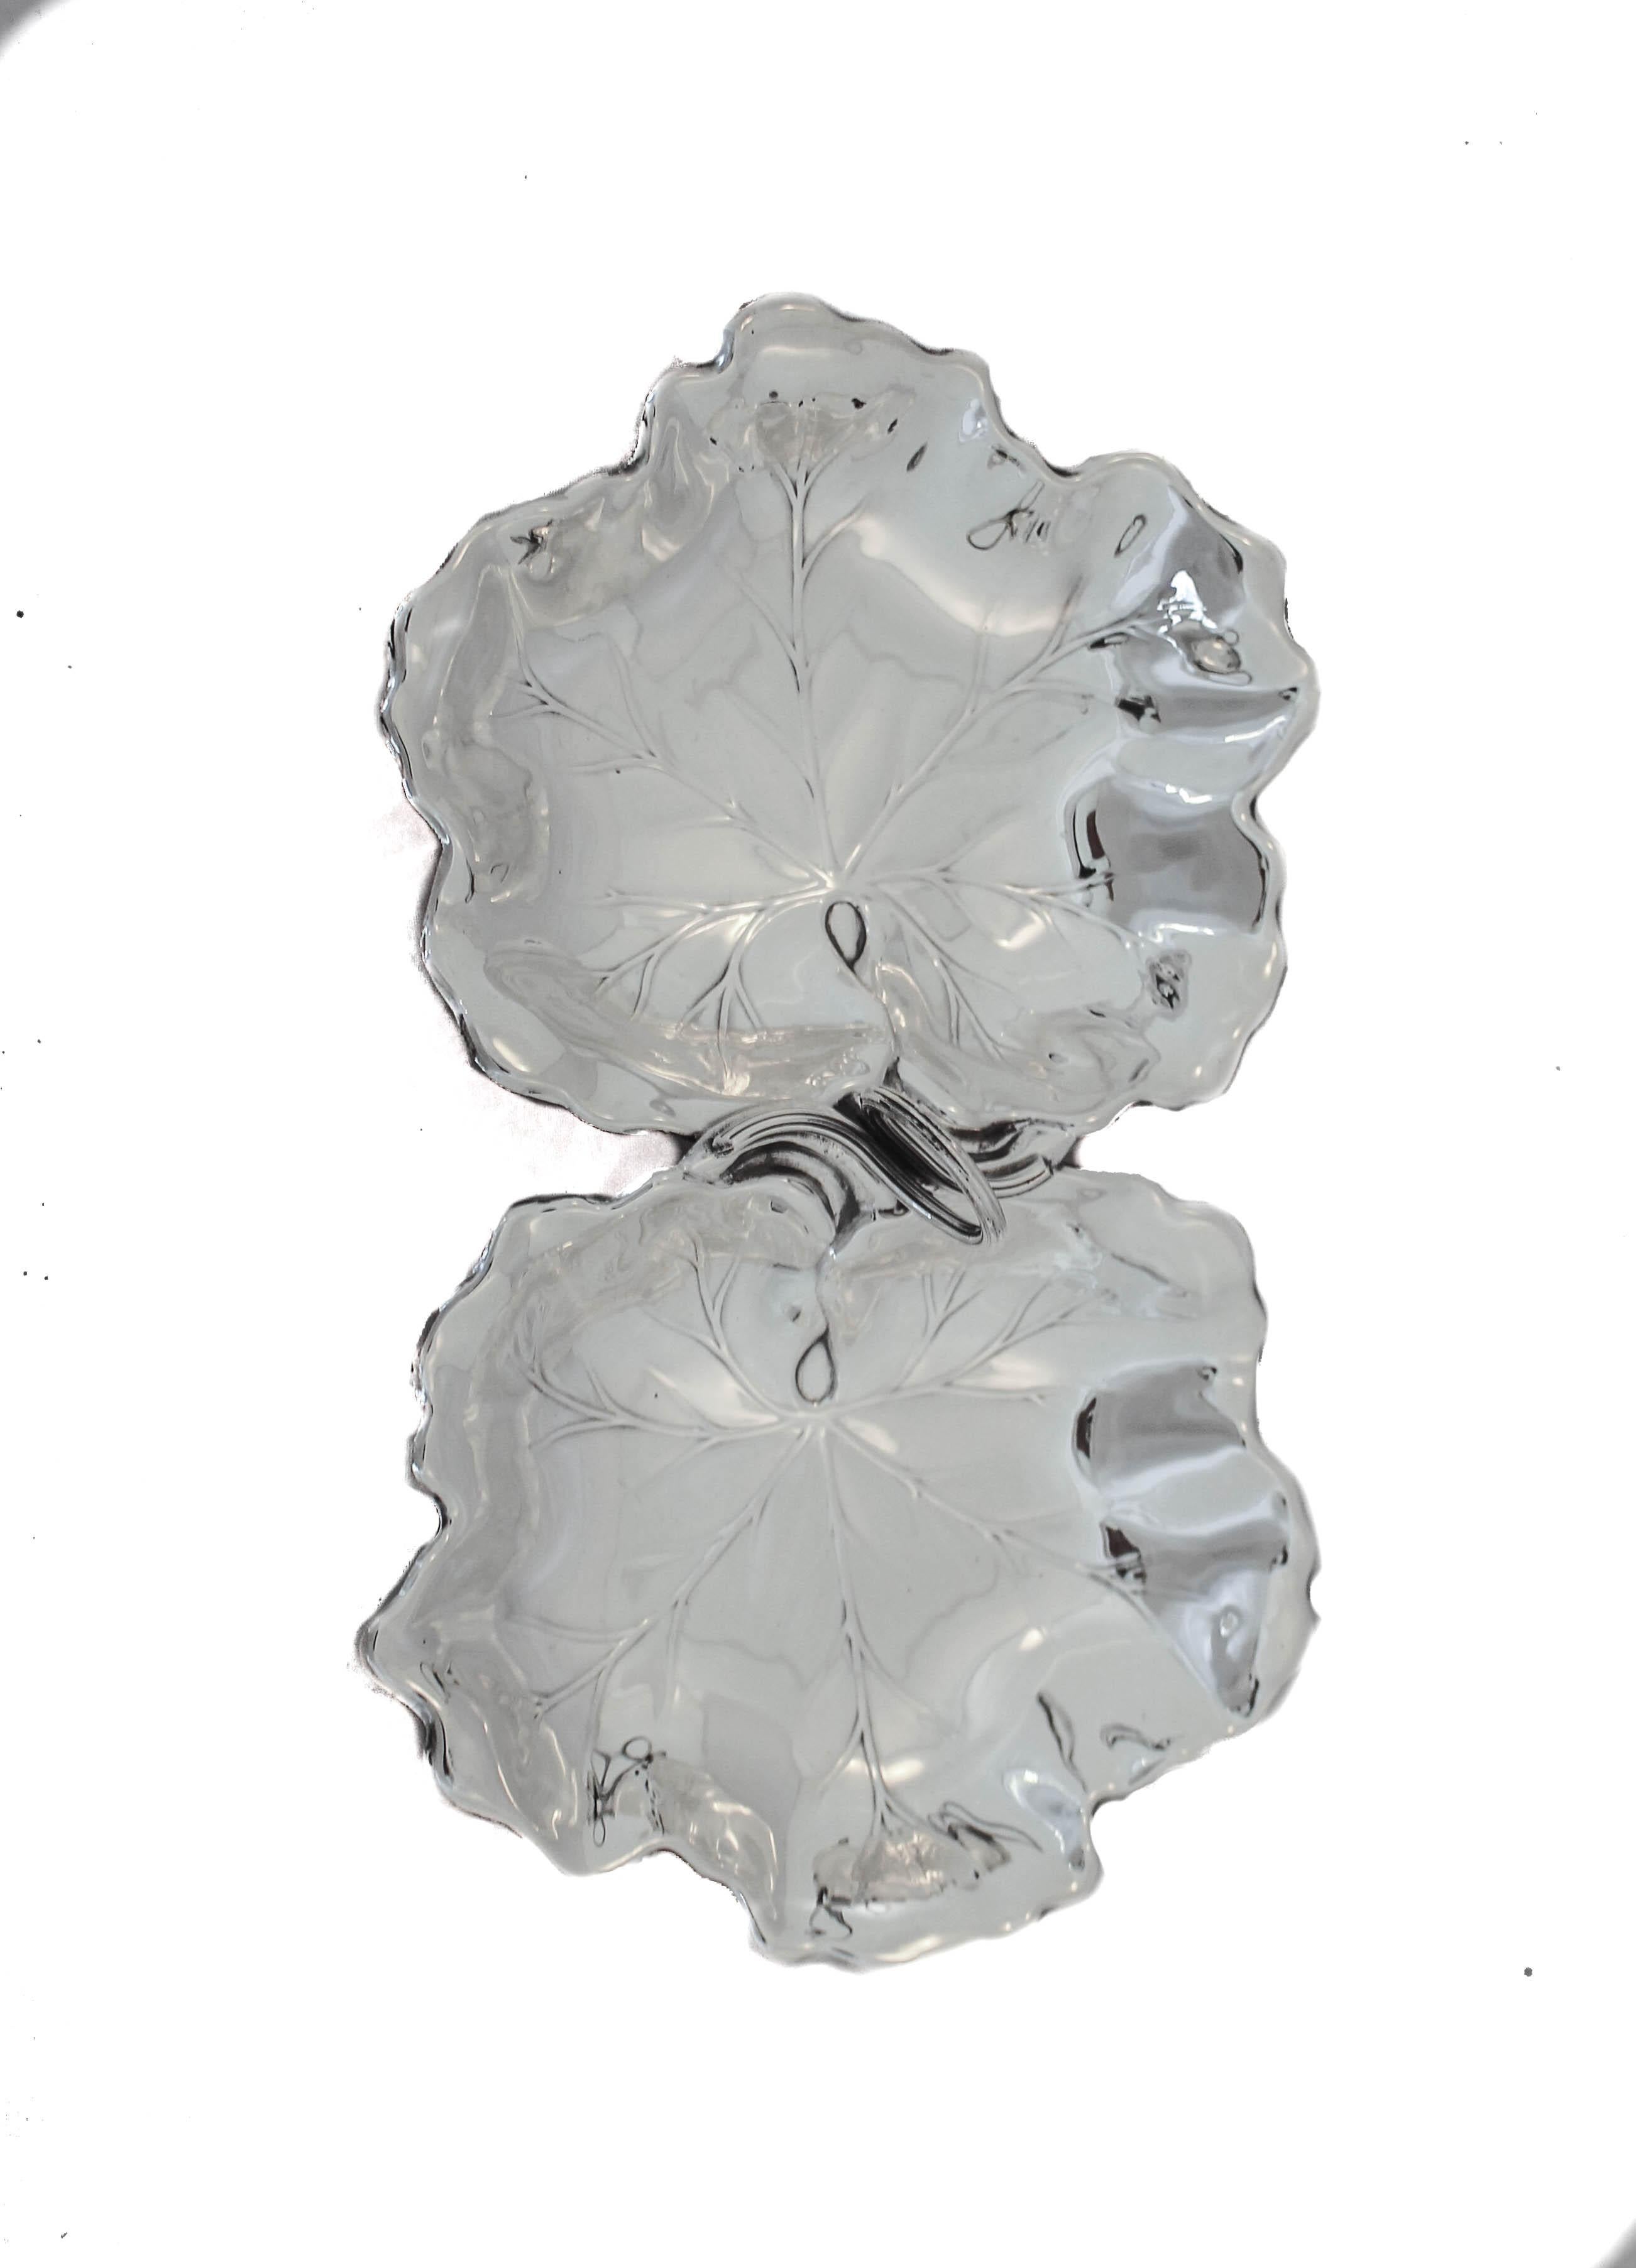 We are delighted to offer you this pair of sterling silver leaf dishes by Reed and Barton hall-marked 1952. They have scalloped edges and an etched pattern in the leaf mimicking a real leaf. In the center a handle allows for you to carry and pass